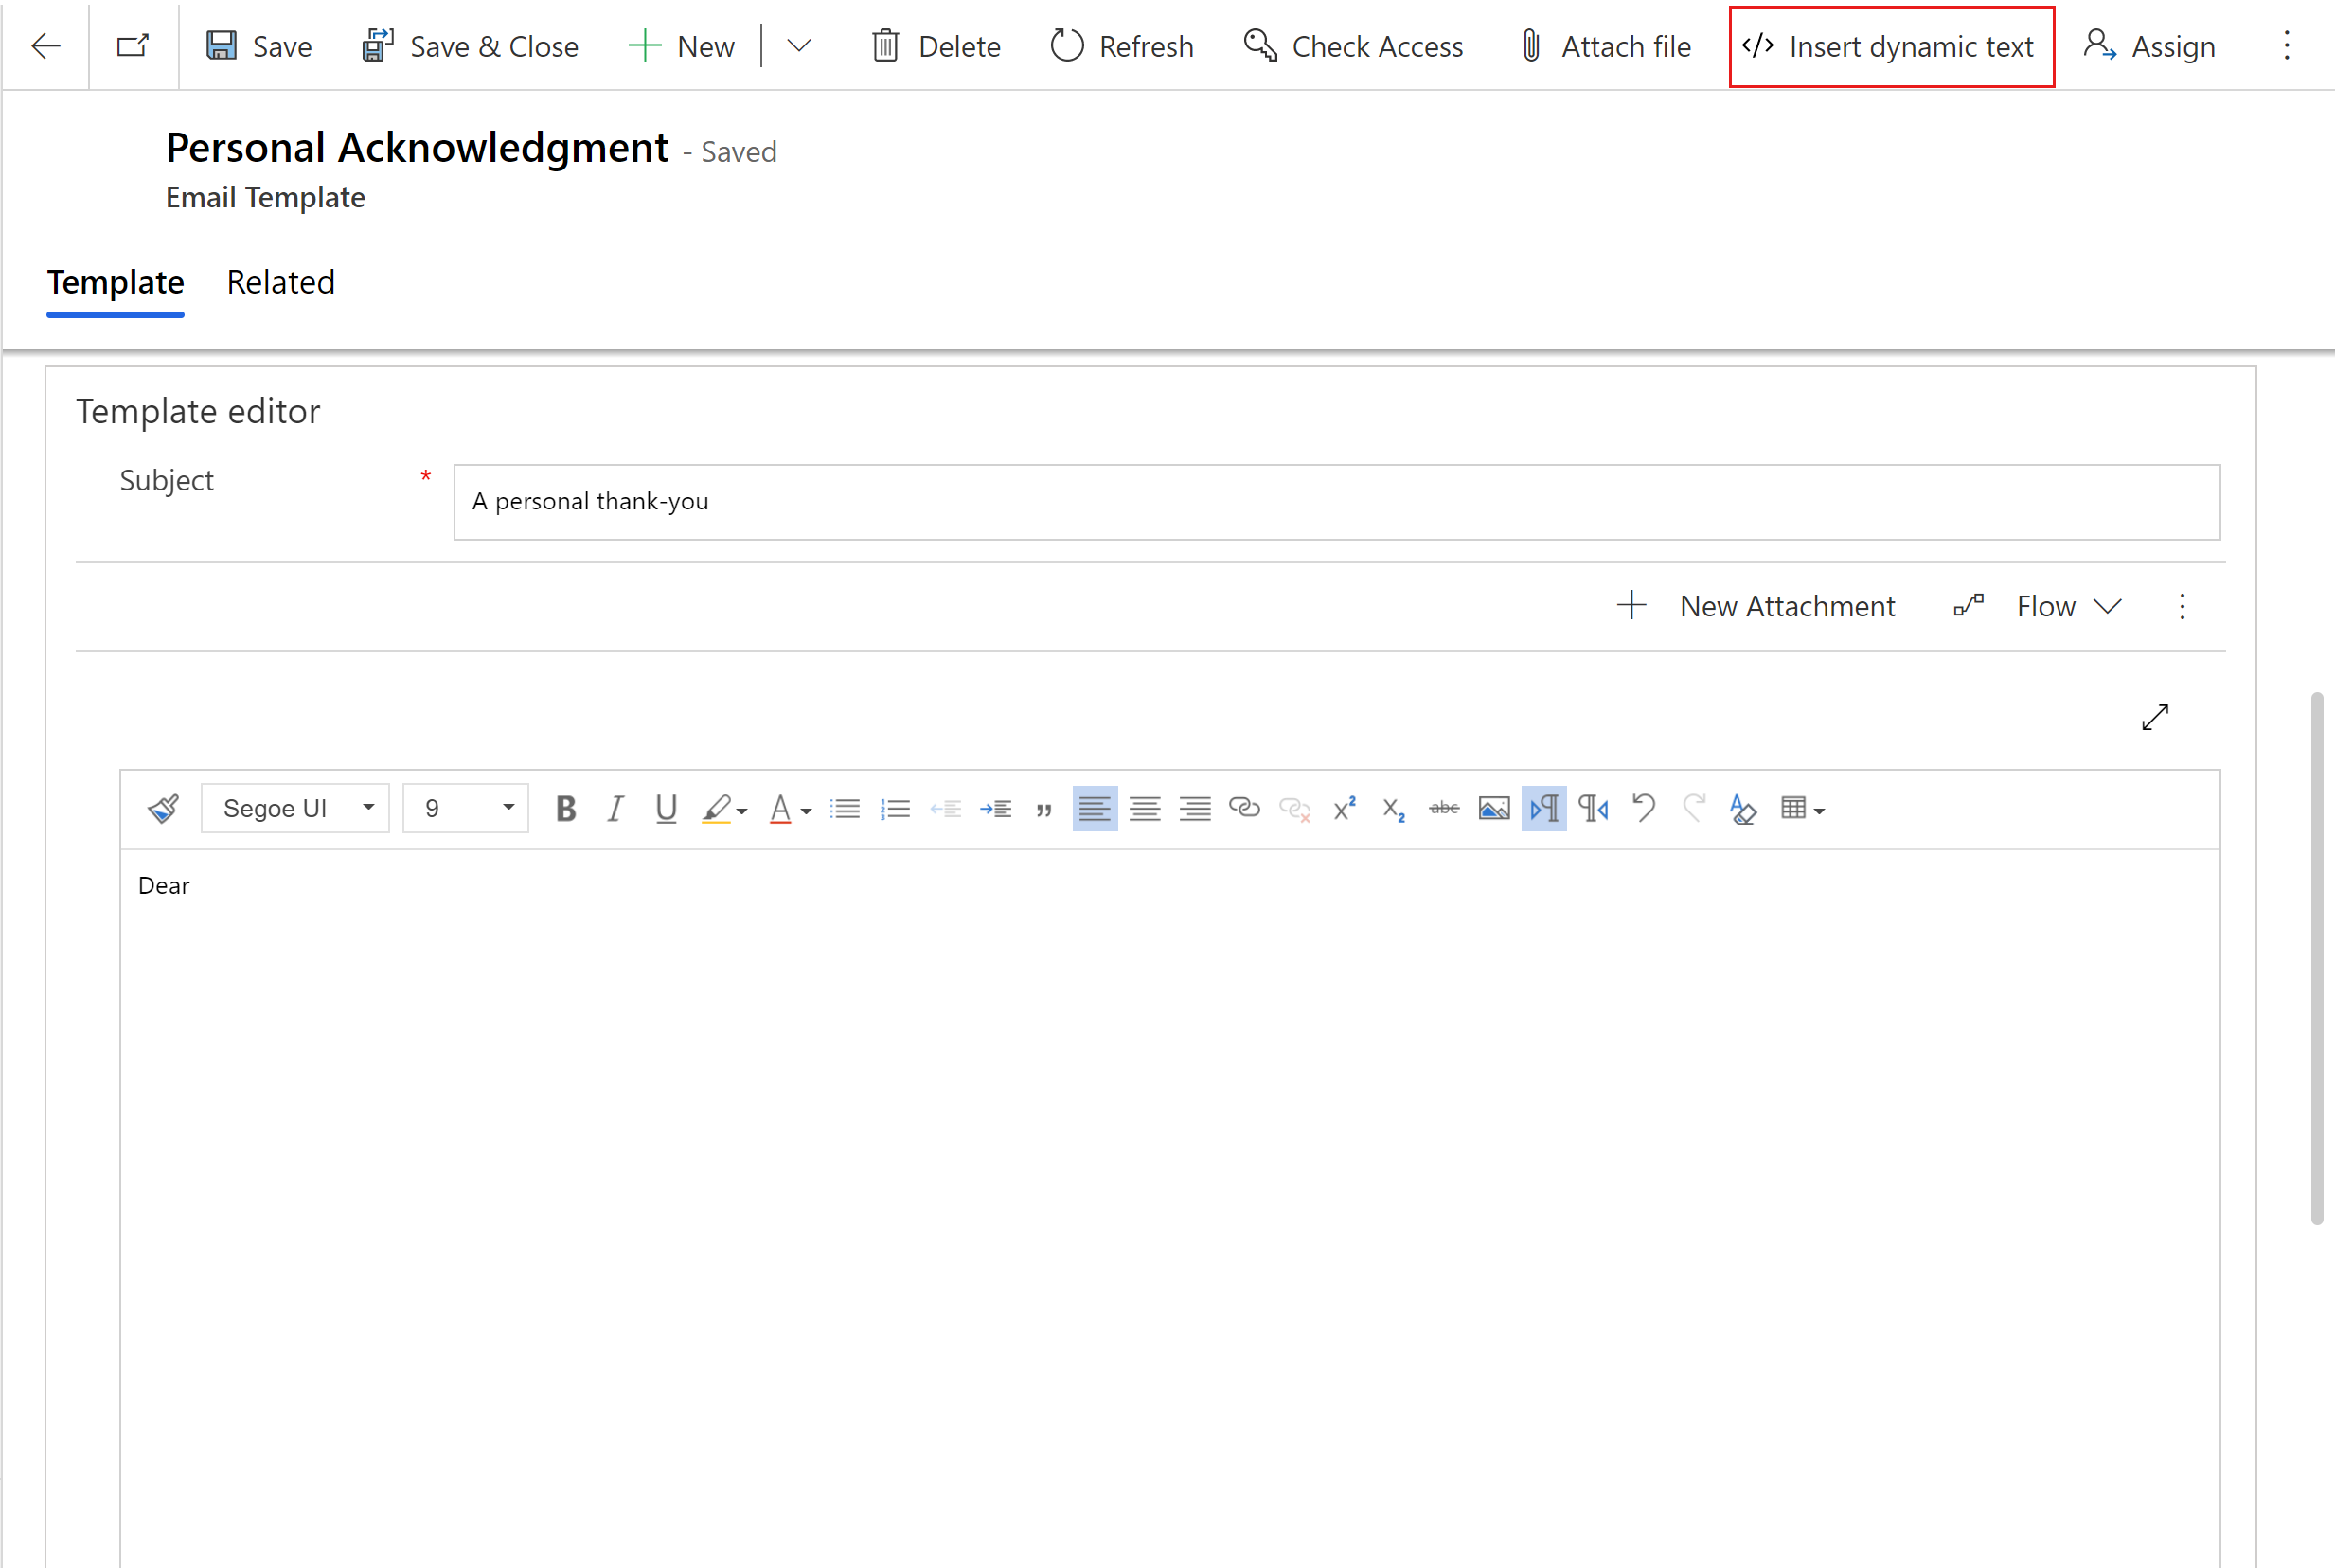 The email template editor, with Insert dynamic text highlighted.